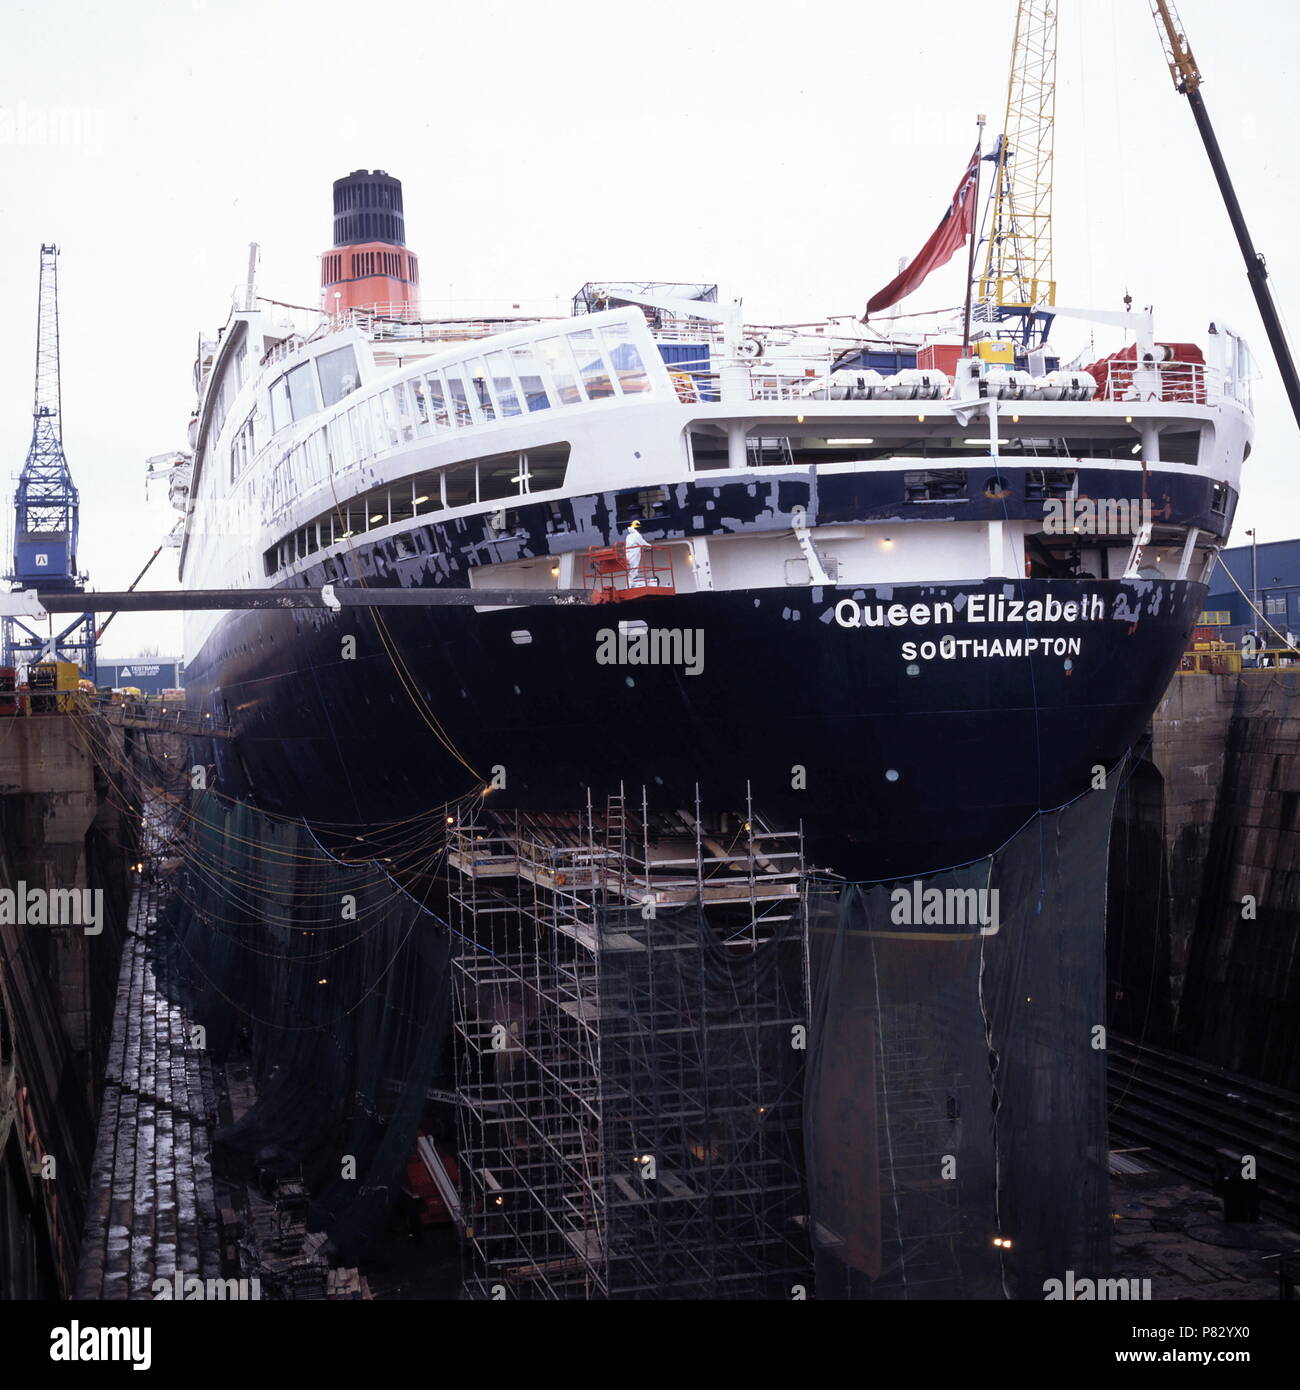 AJAXNETPHOTO. DEC 1996. SOUTHAMPTON, ENGLAND. -  PORT QUARTER VIEW OF THE CUNARD PASSENGER LINER QUEEN ELIZABETH 2 - QE2 - IN KGV DRY DOCK, HER HULL SHROUDED IN NETTING, UNDERGOES REFIT.  PHOTO:JONATHAN EASTLAND/AJAX.  REF:1296 34 Stock Photo